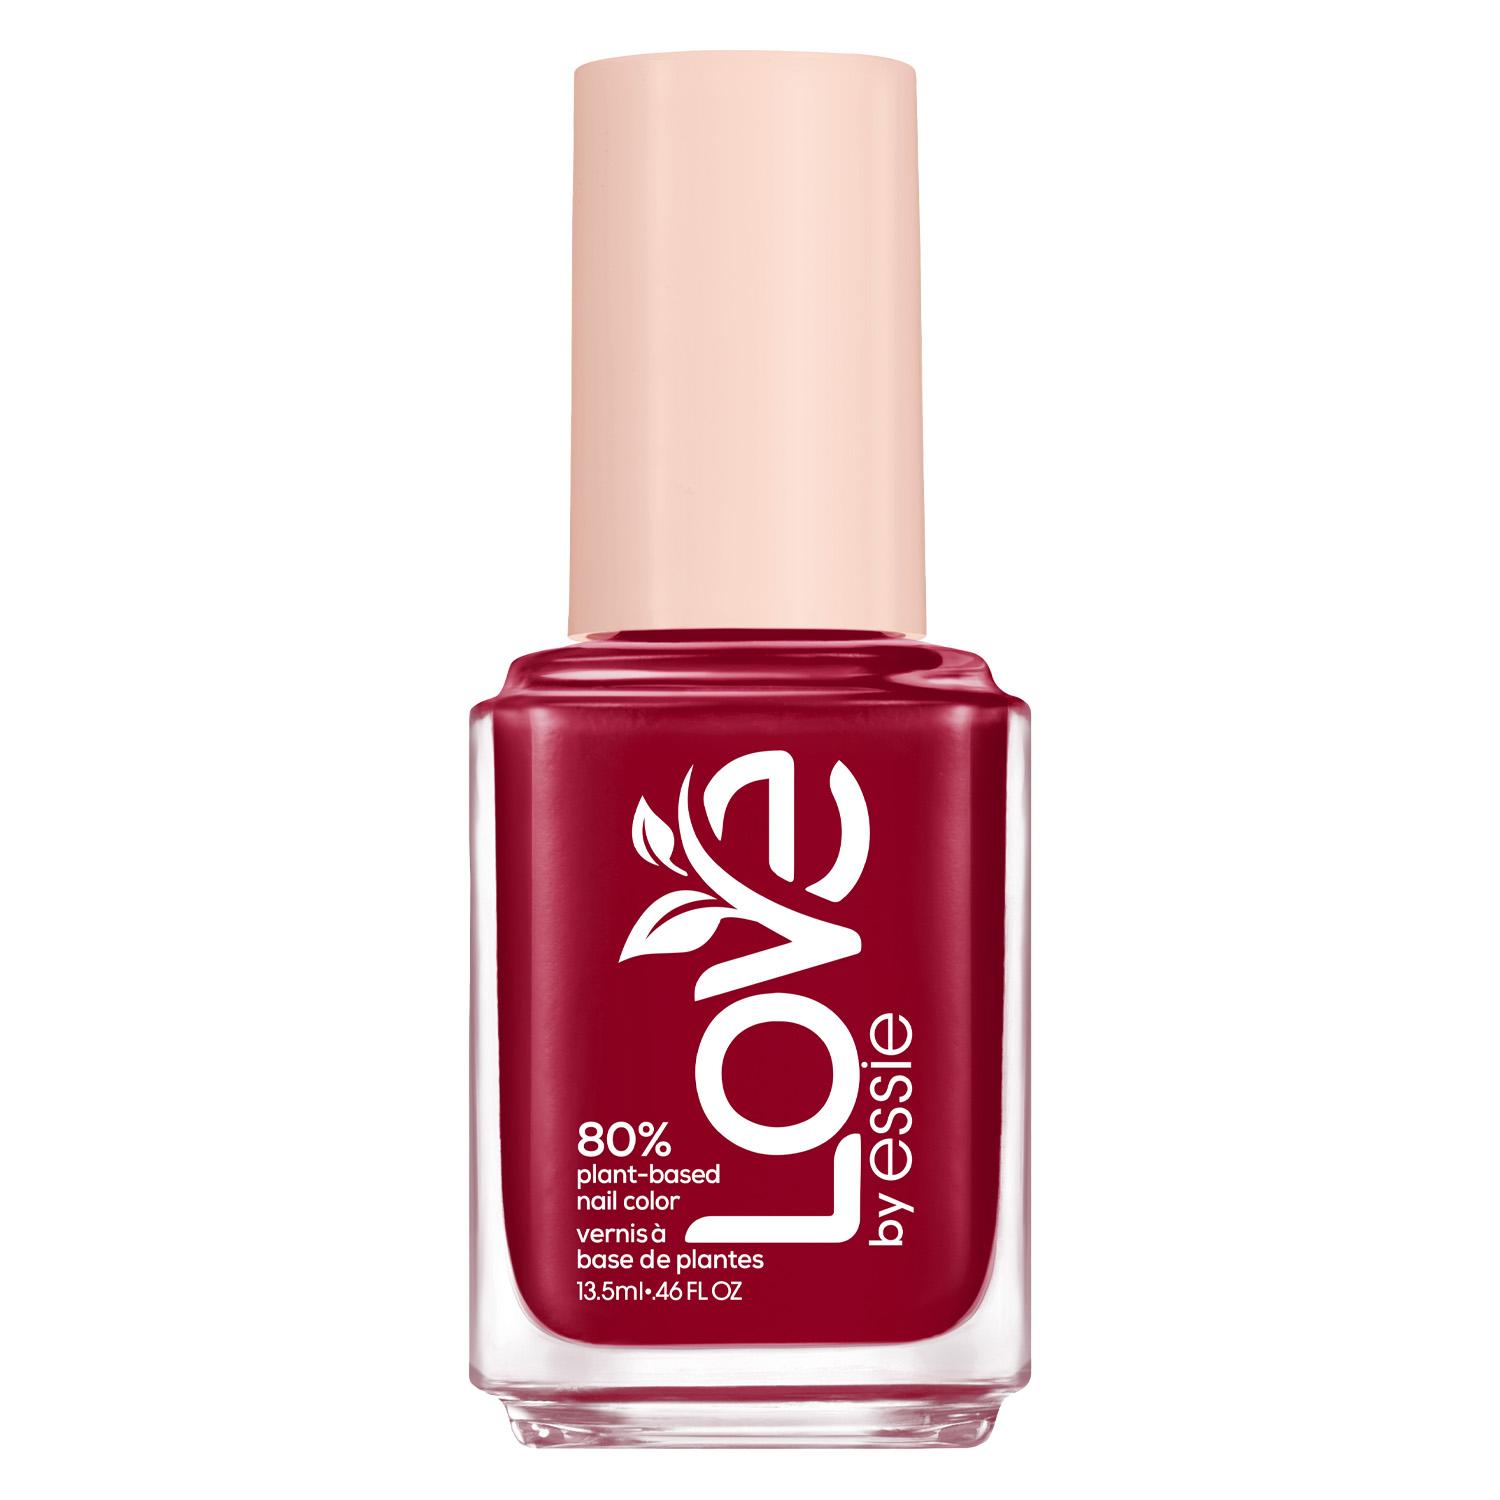 Love by essie - i am the moment 120